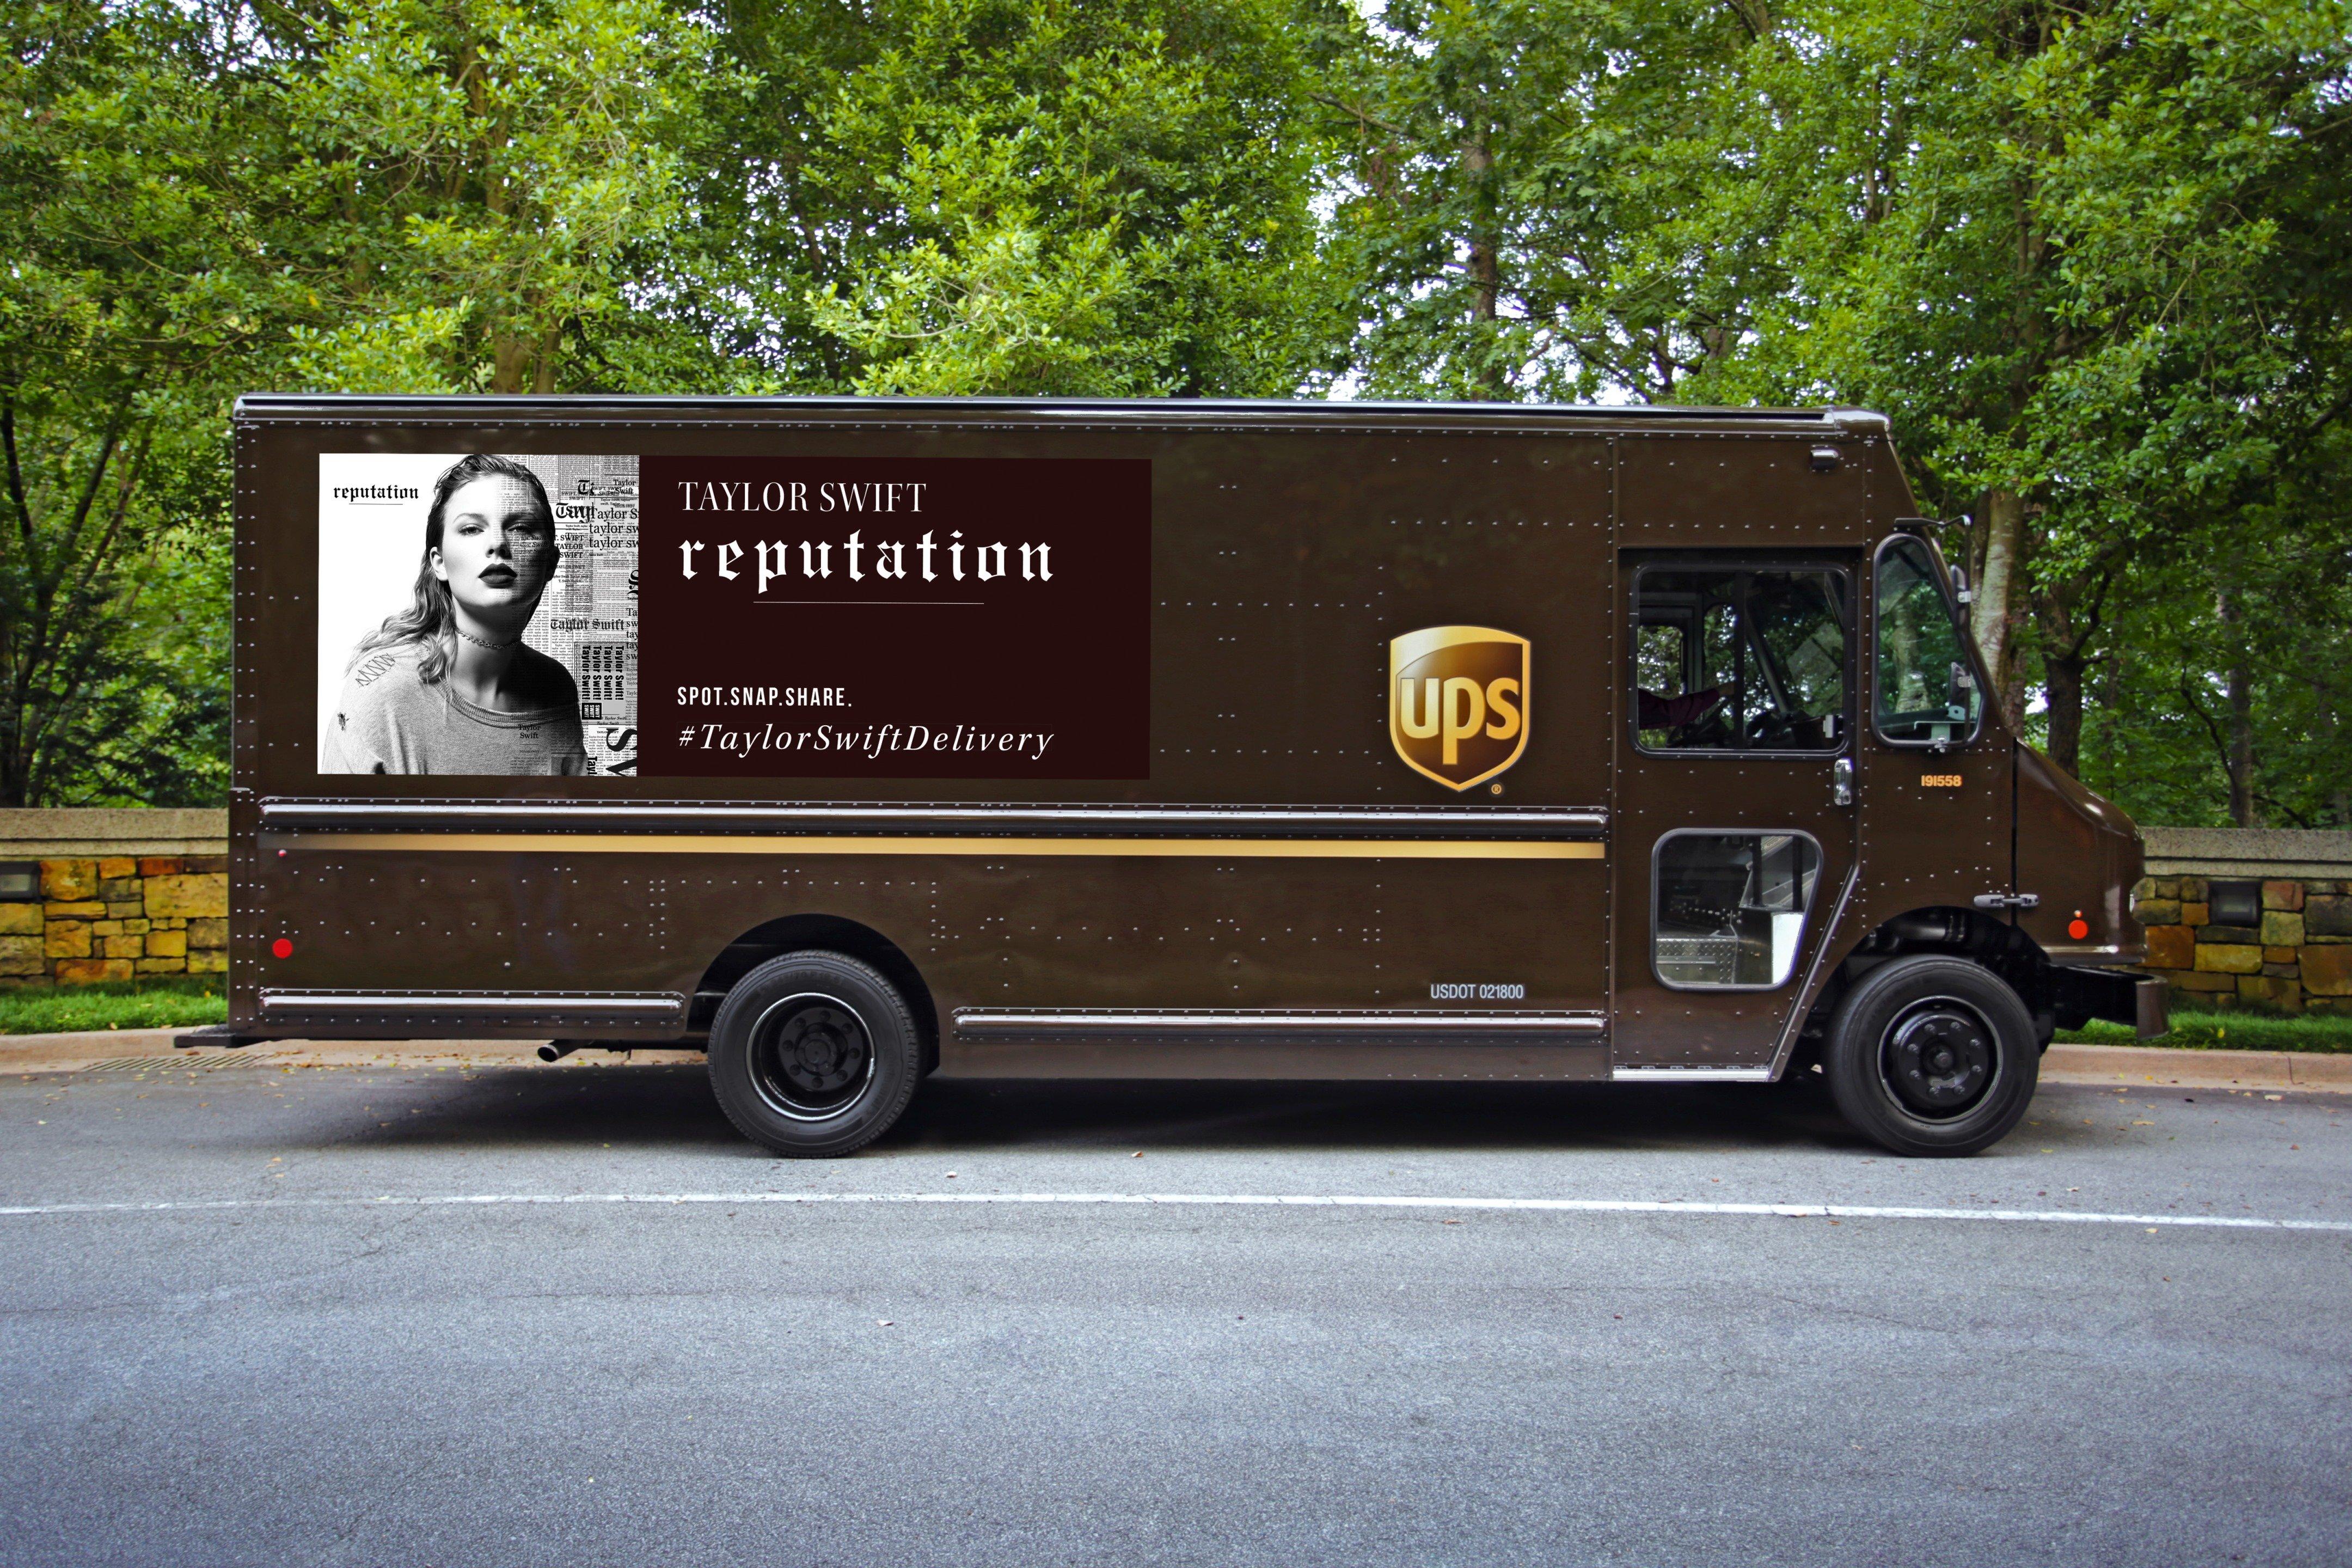 UPS truck with Taylor Swift album cover